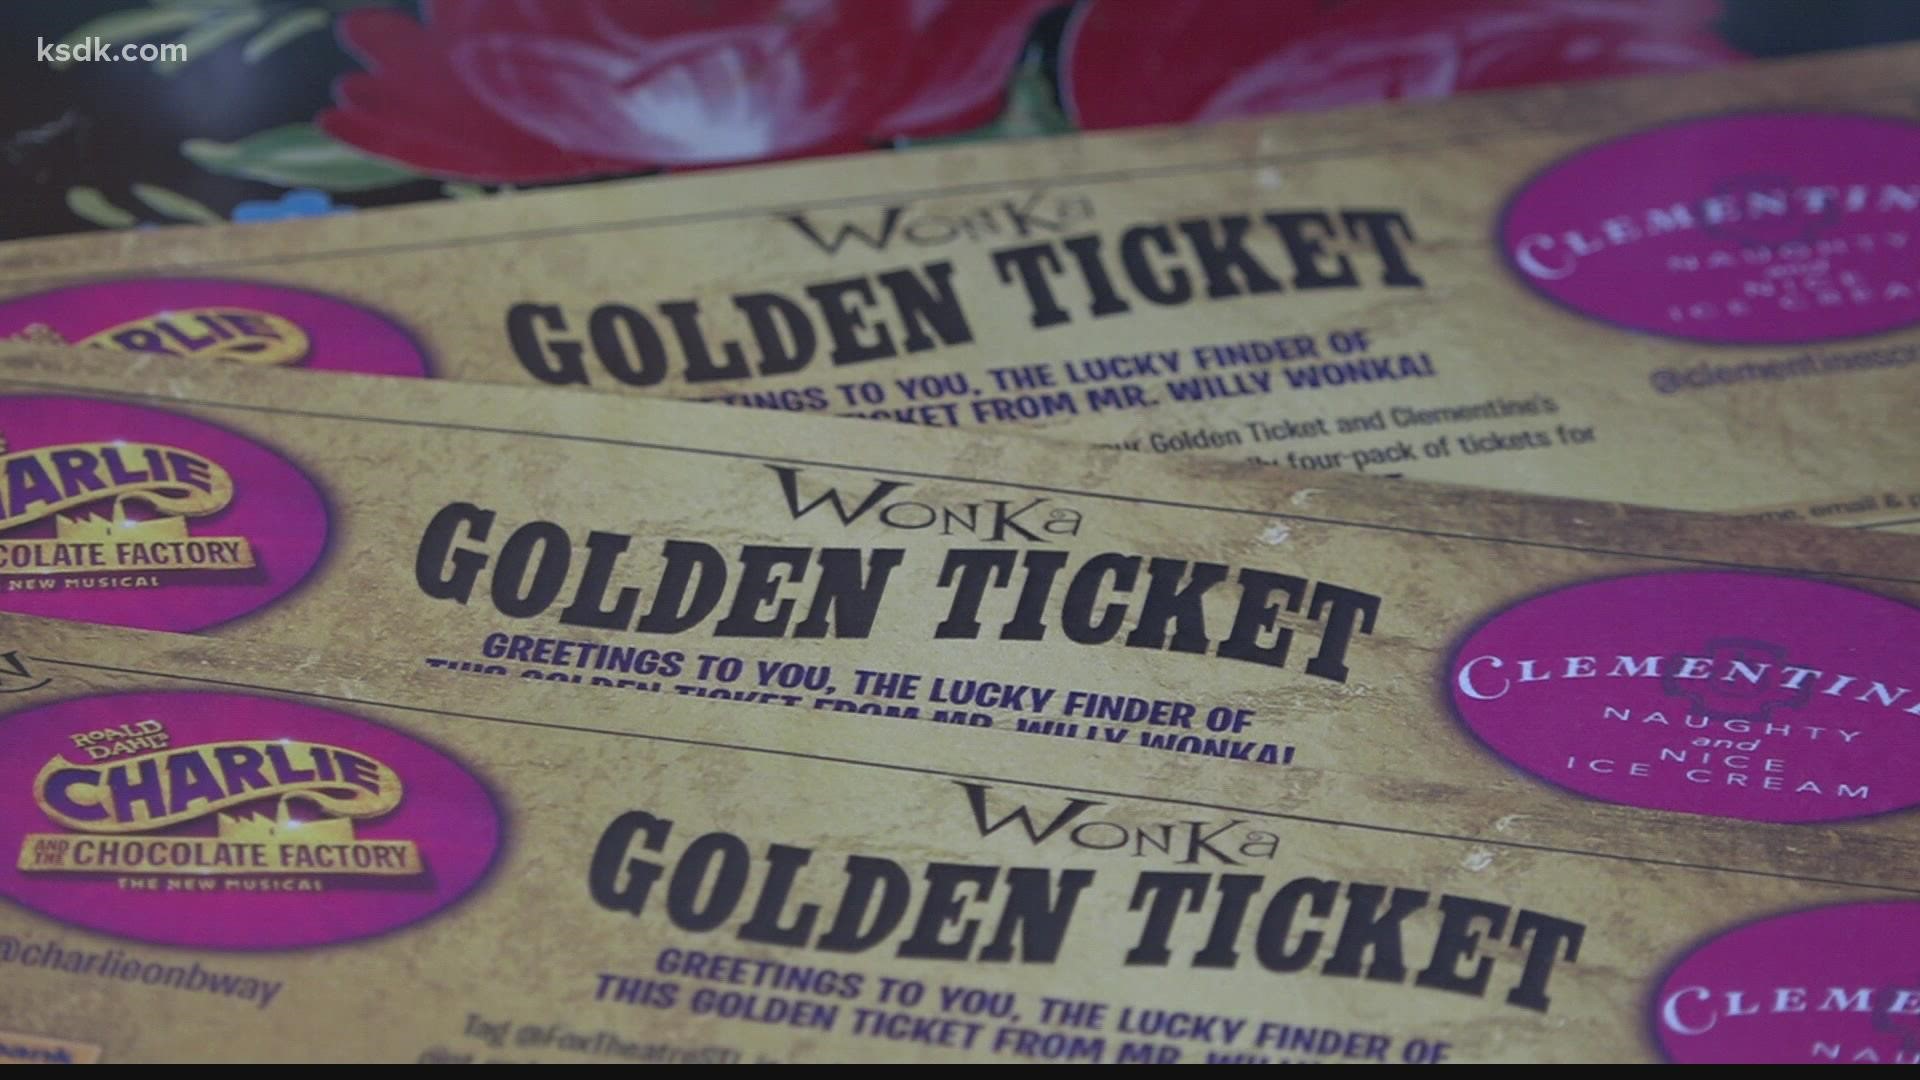 Six people in St. Louis will have the chance to win a golden ticket thanks to Clementine’s Creamery